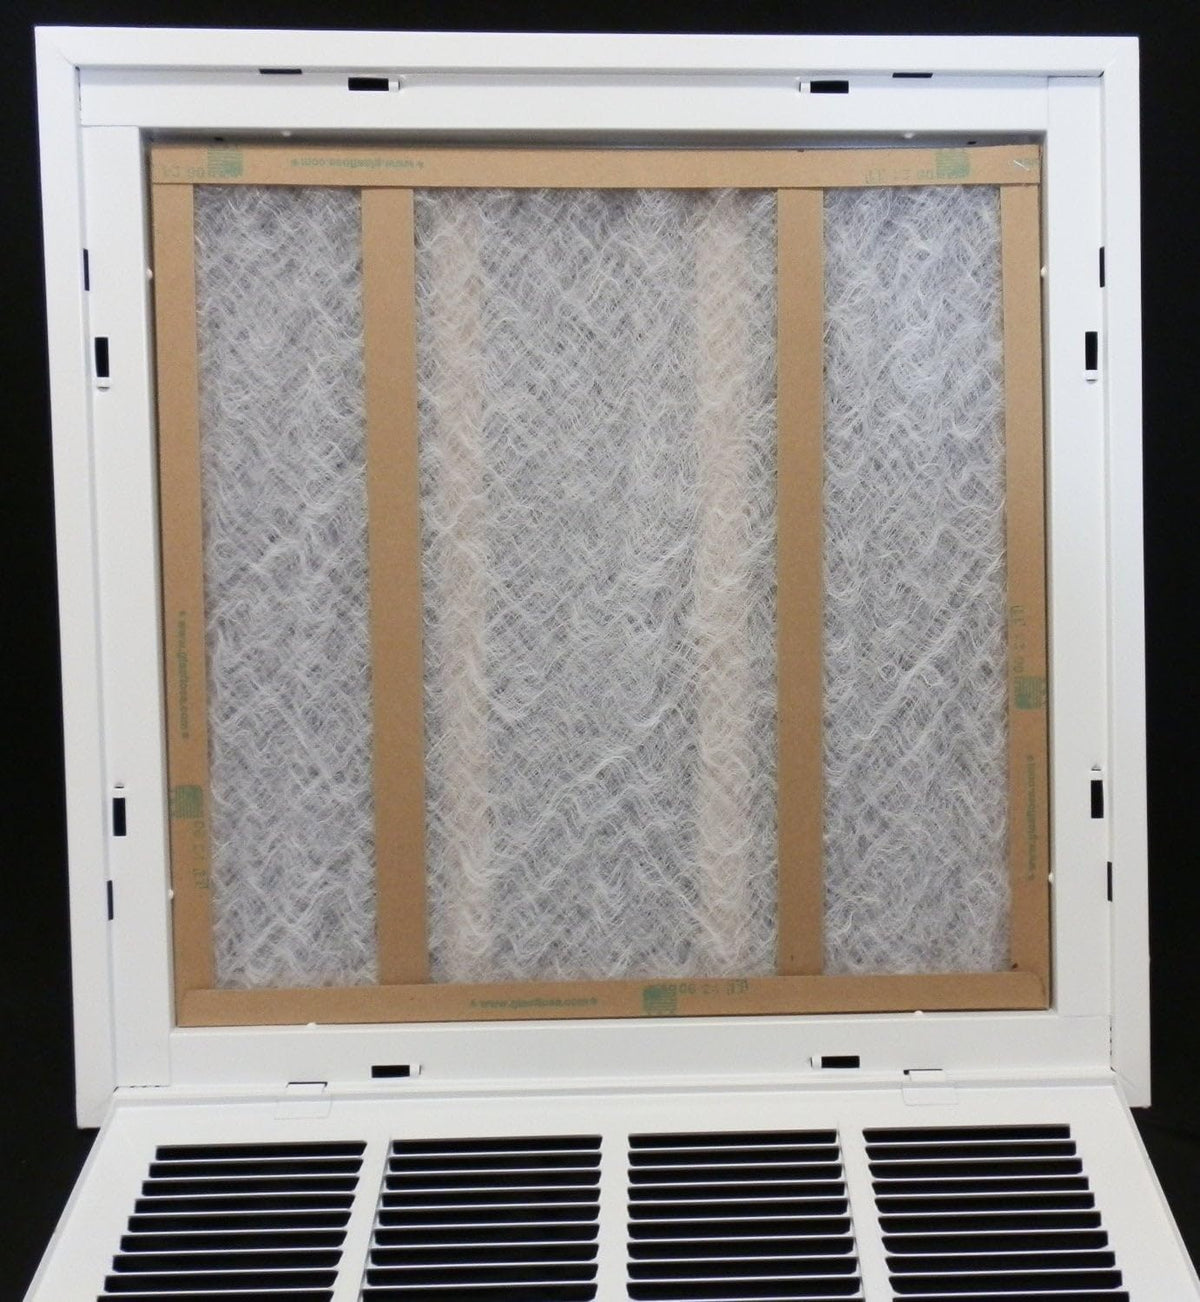 20&quot; X 36&quot; Steel Return Air Filter Grille for 1&quot; Filter - Removable Frame - [Outer Dimensions: 22 5/8&quot; X 38 5/8&quot;]